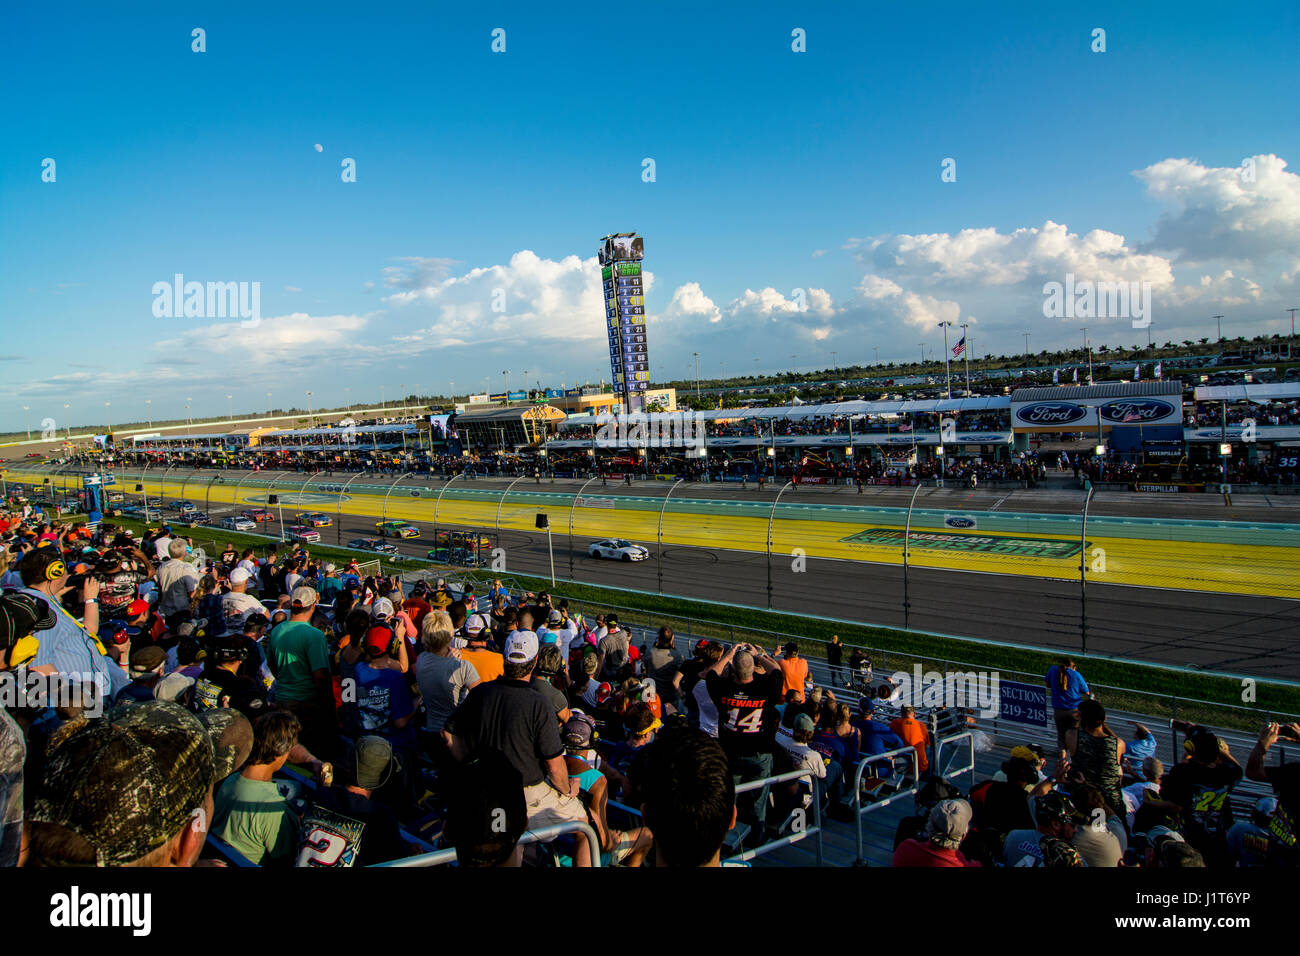 NASCAR race at Miami Homestead Speedway fan view Stock Photo